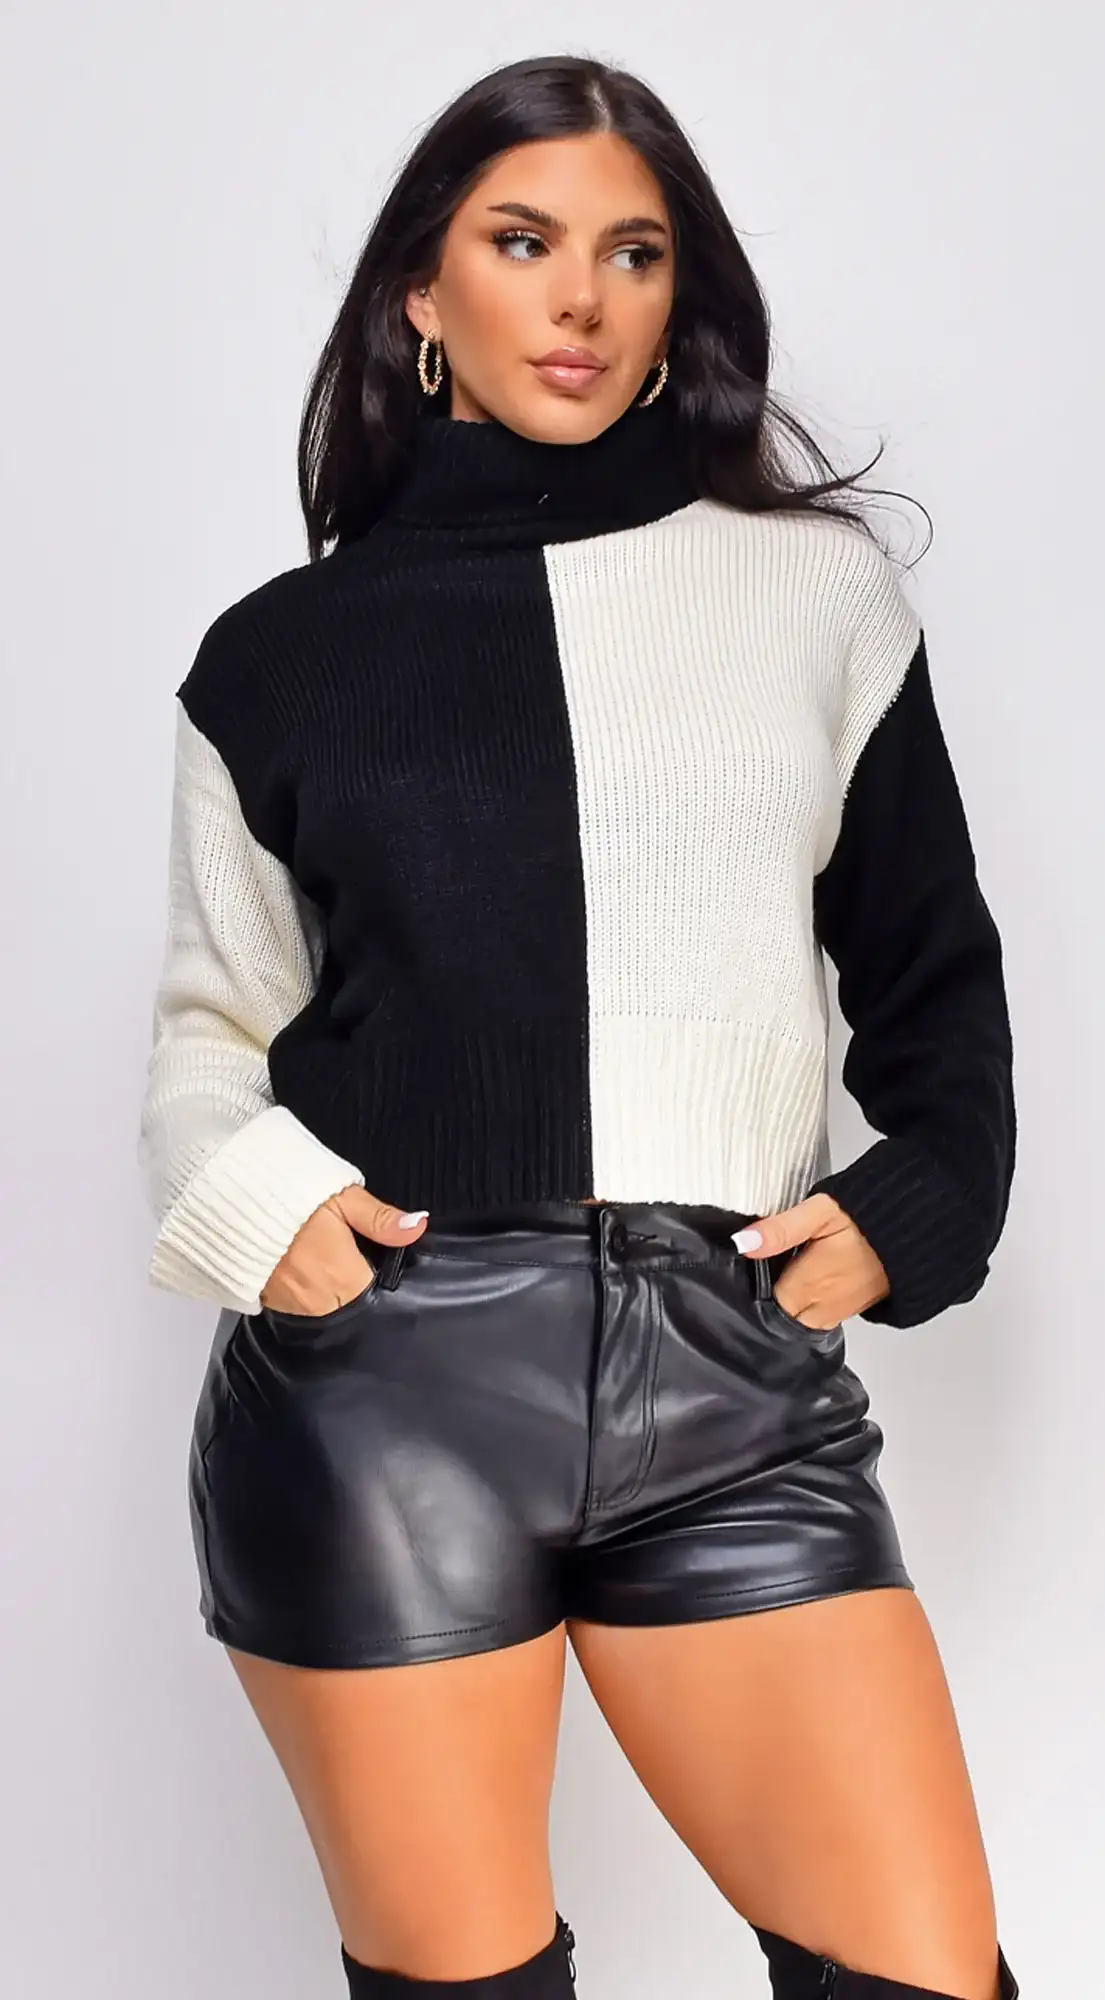 Image of Kaia Black White Color Block Turtle Neck Sweater Top